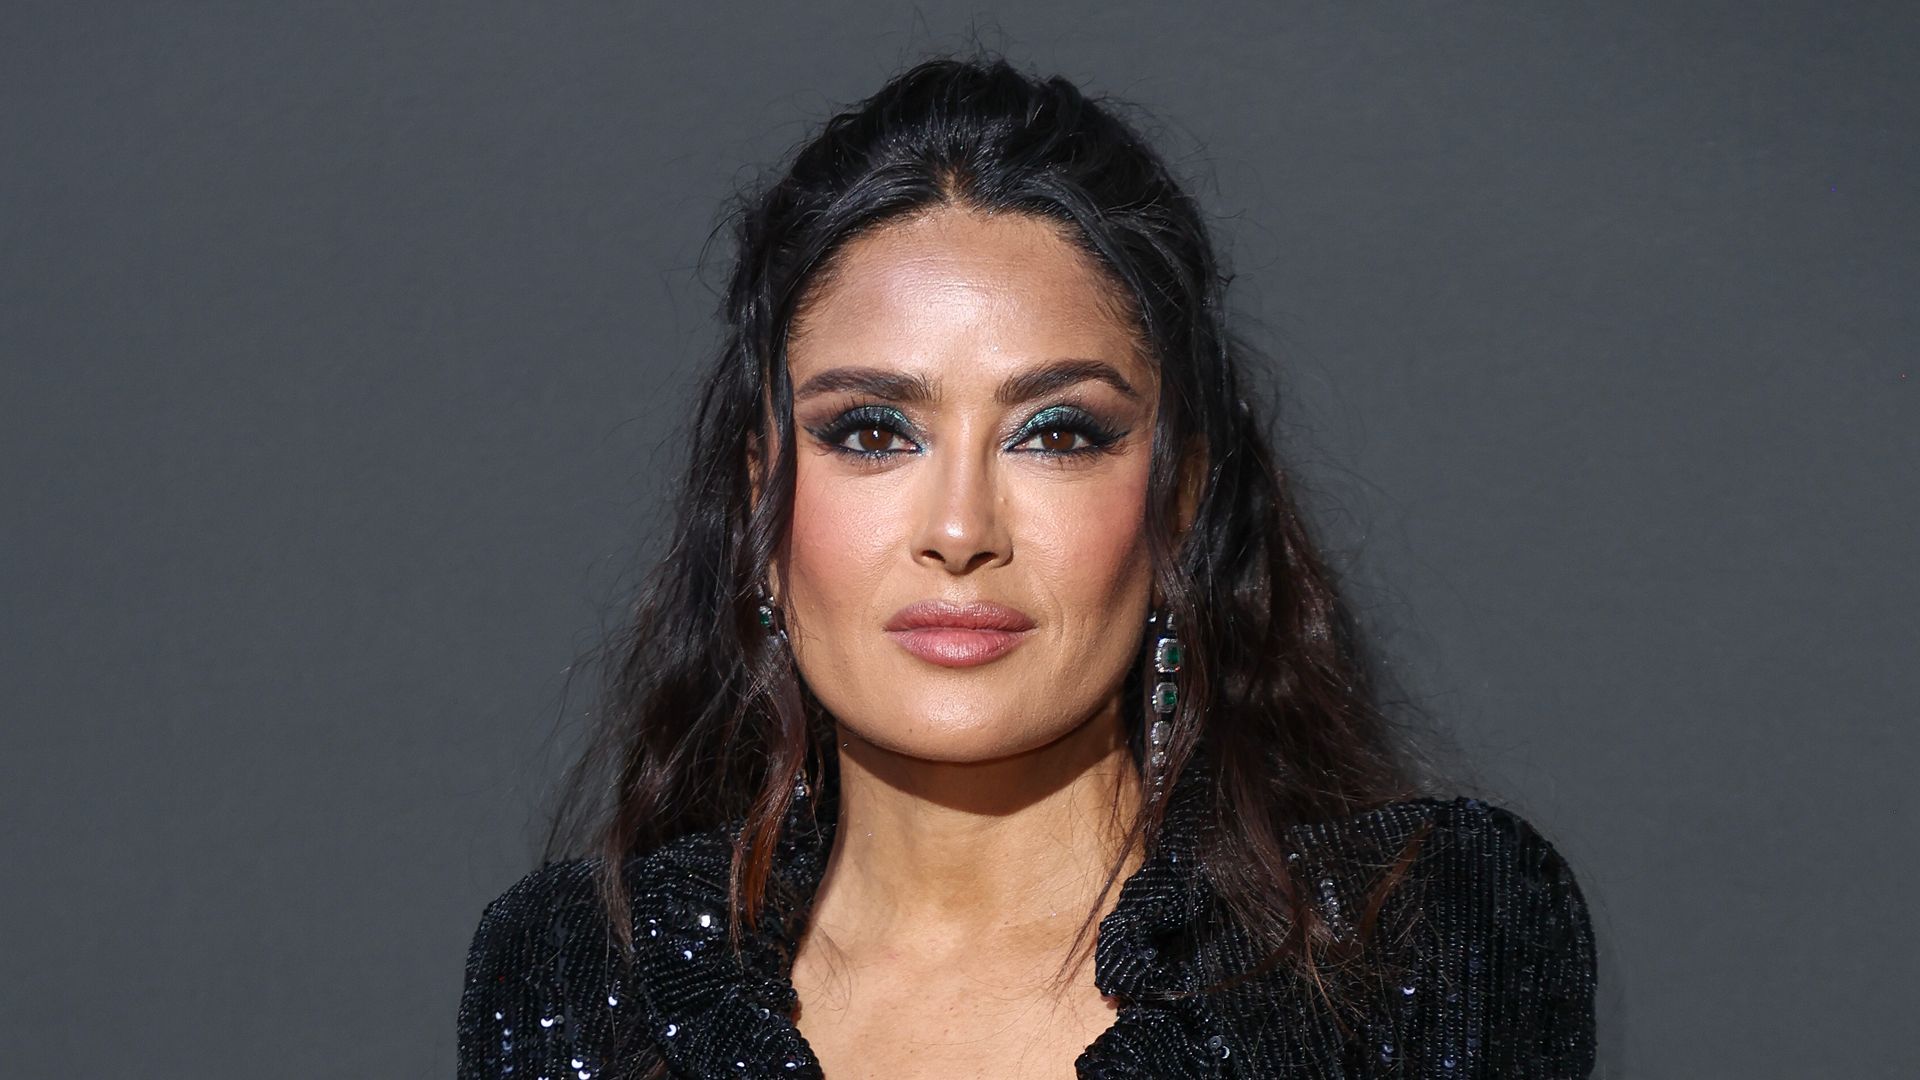 Salma Hayek attends the 2023 "Kering Women in Motion Award" during the 76th annual Cannes film festival